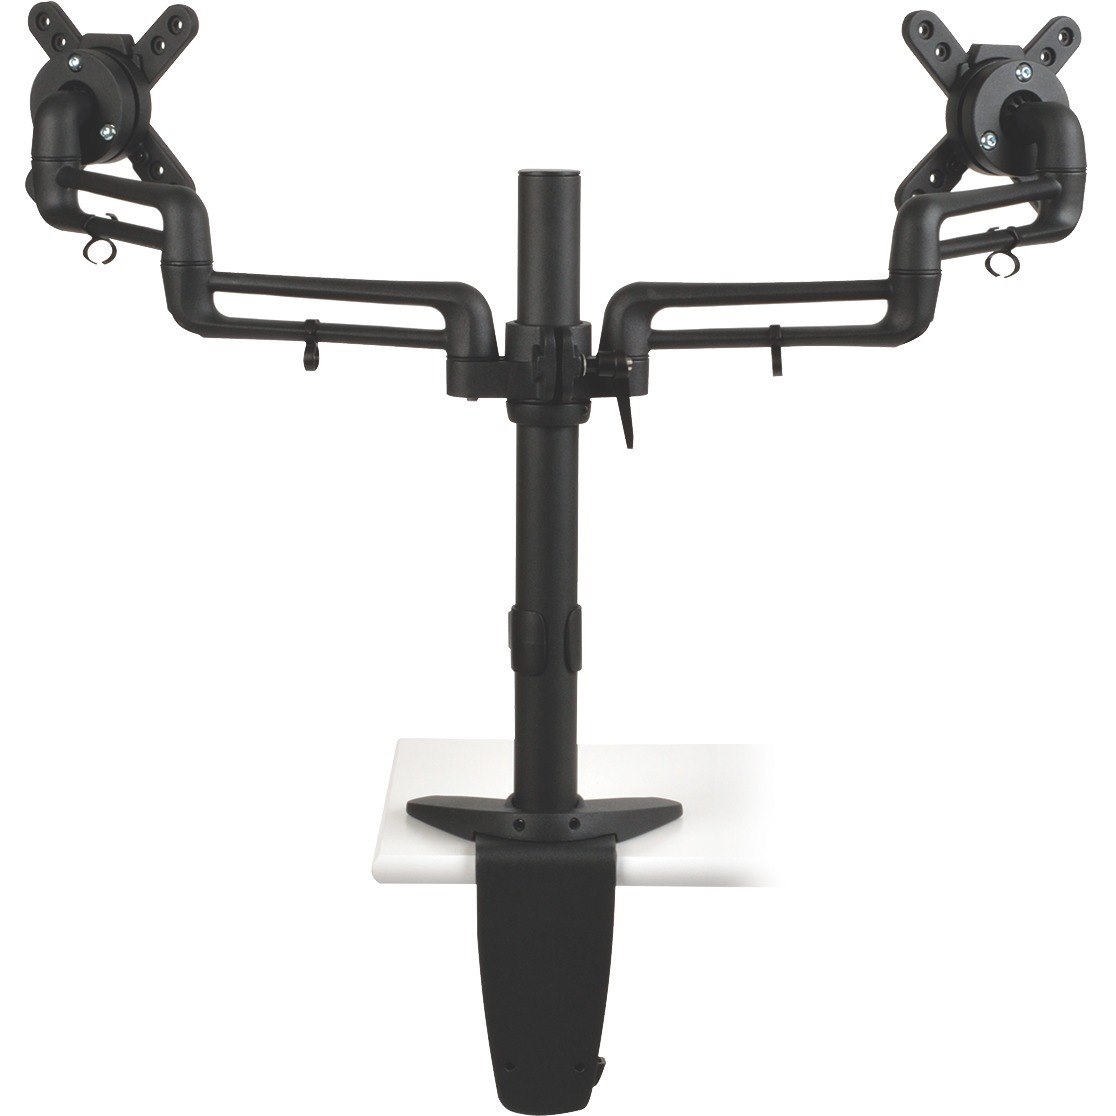 Tripp Lite by Eaton Dual Full Motion Flex Arm Desk Clamp for 13" to 27" Monitors